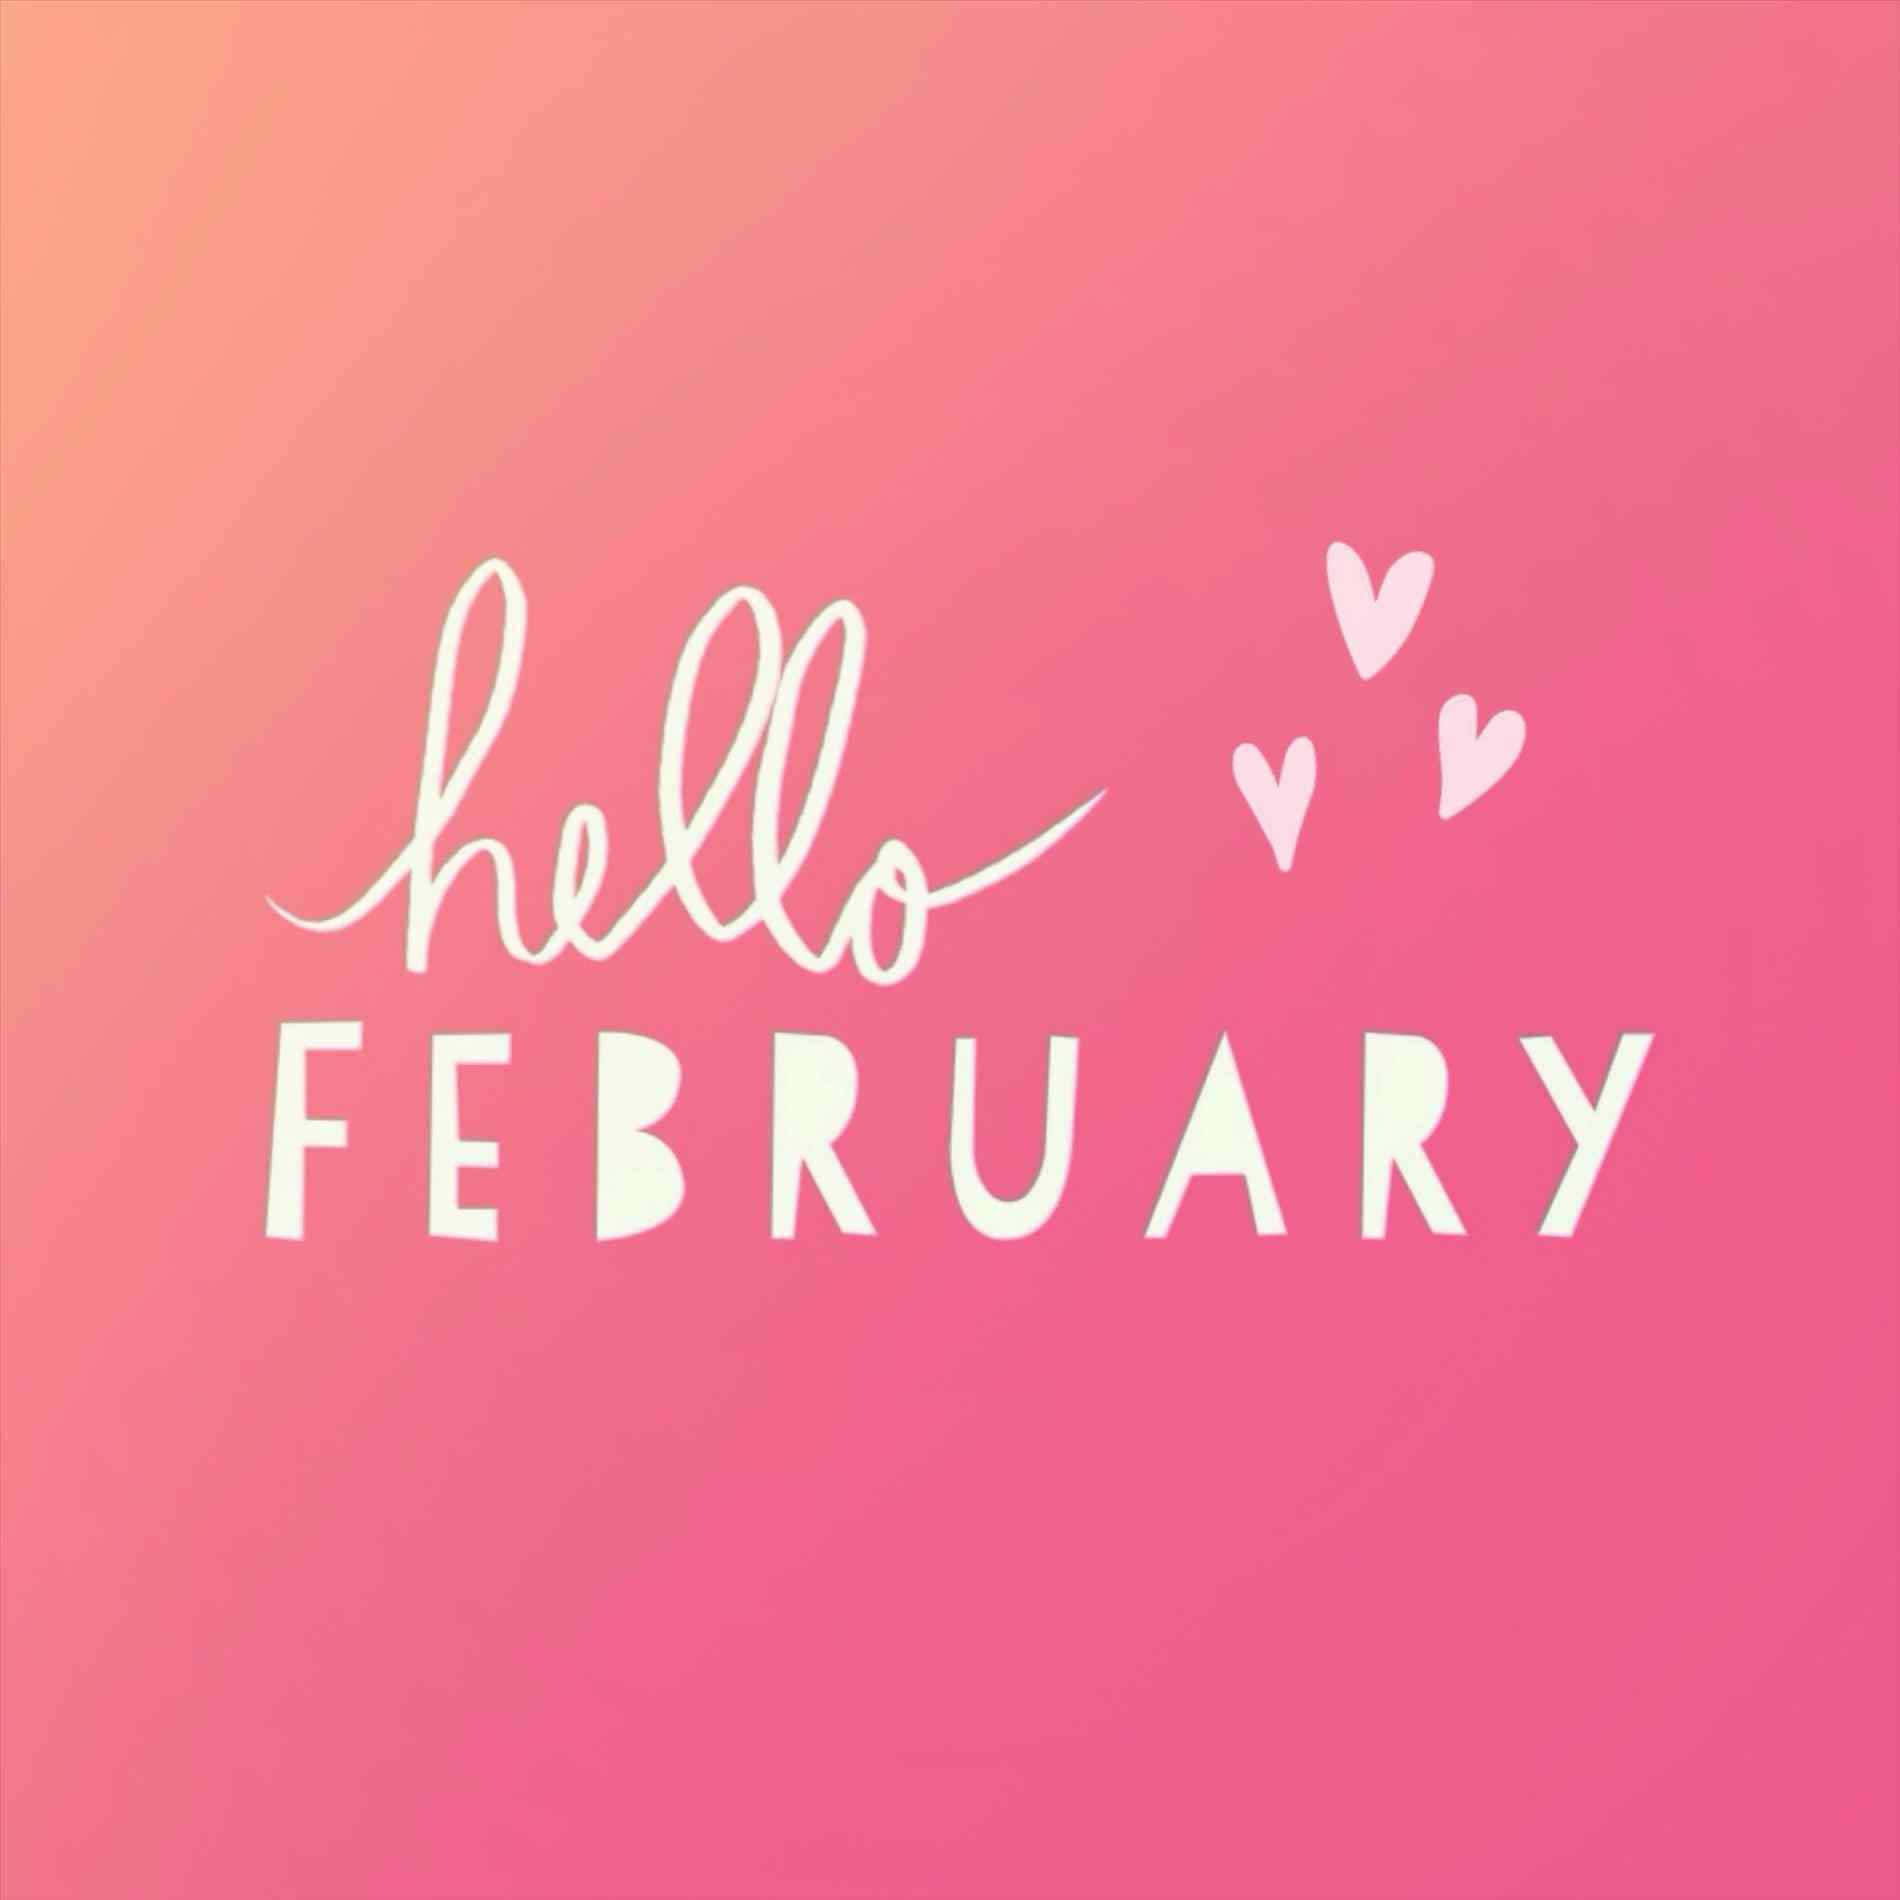 Hello February Wallpaper With Hearts And A Pink Background Wallpaper